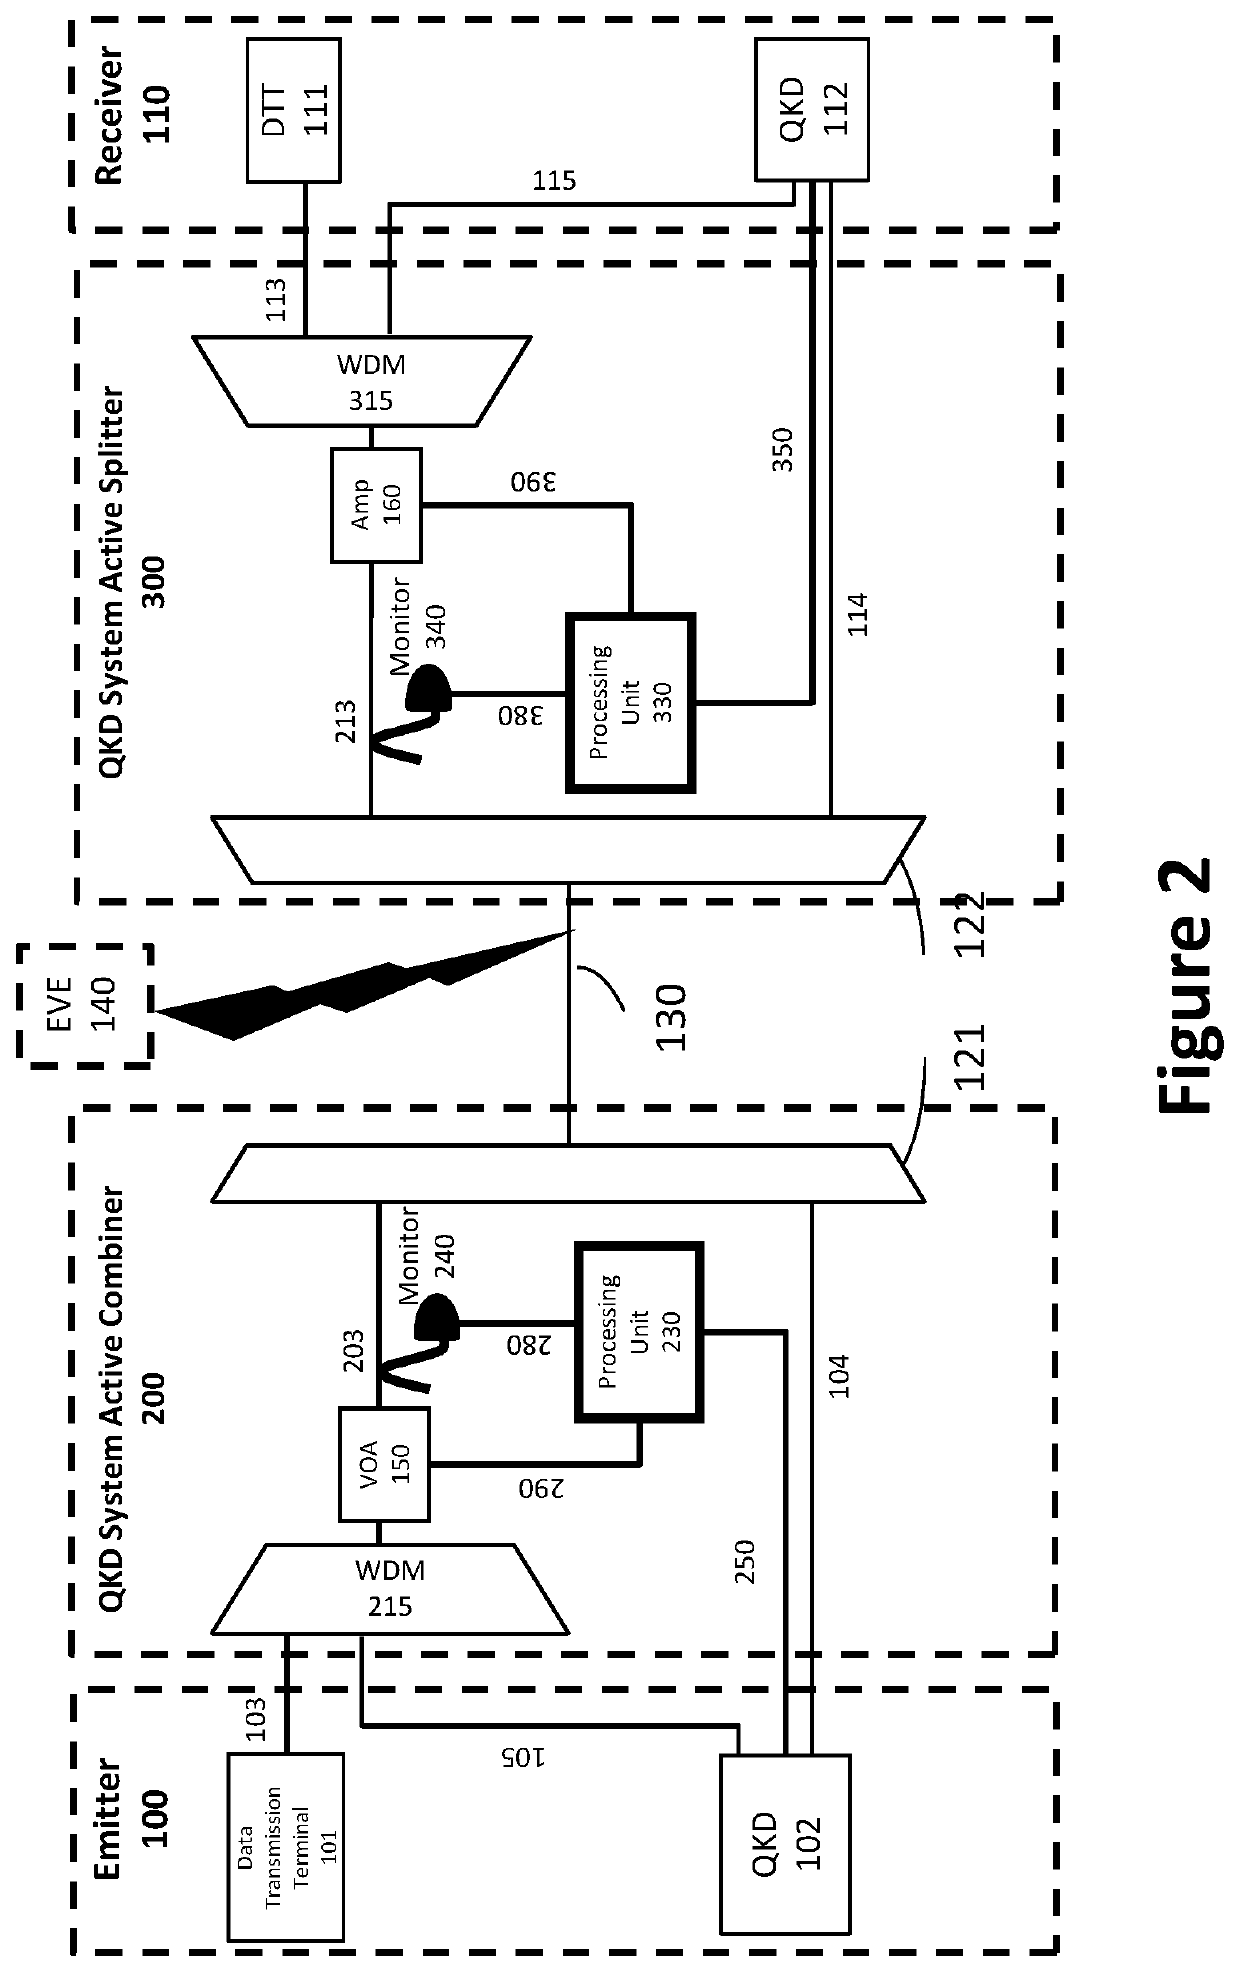 Apparatus and method for direct quantum cryptography system implementation over WDM telecommunication network